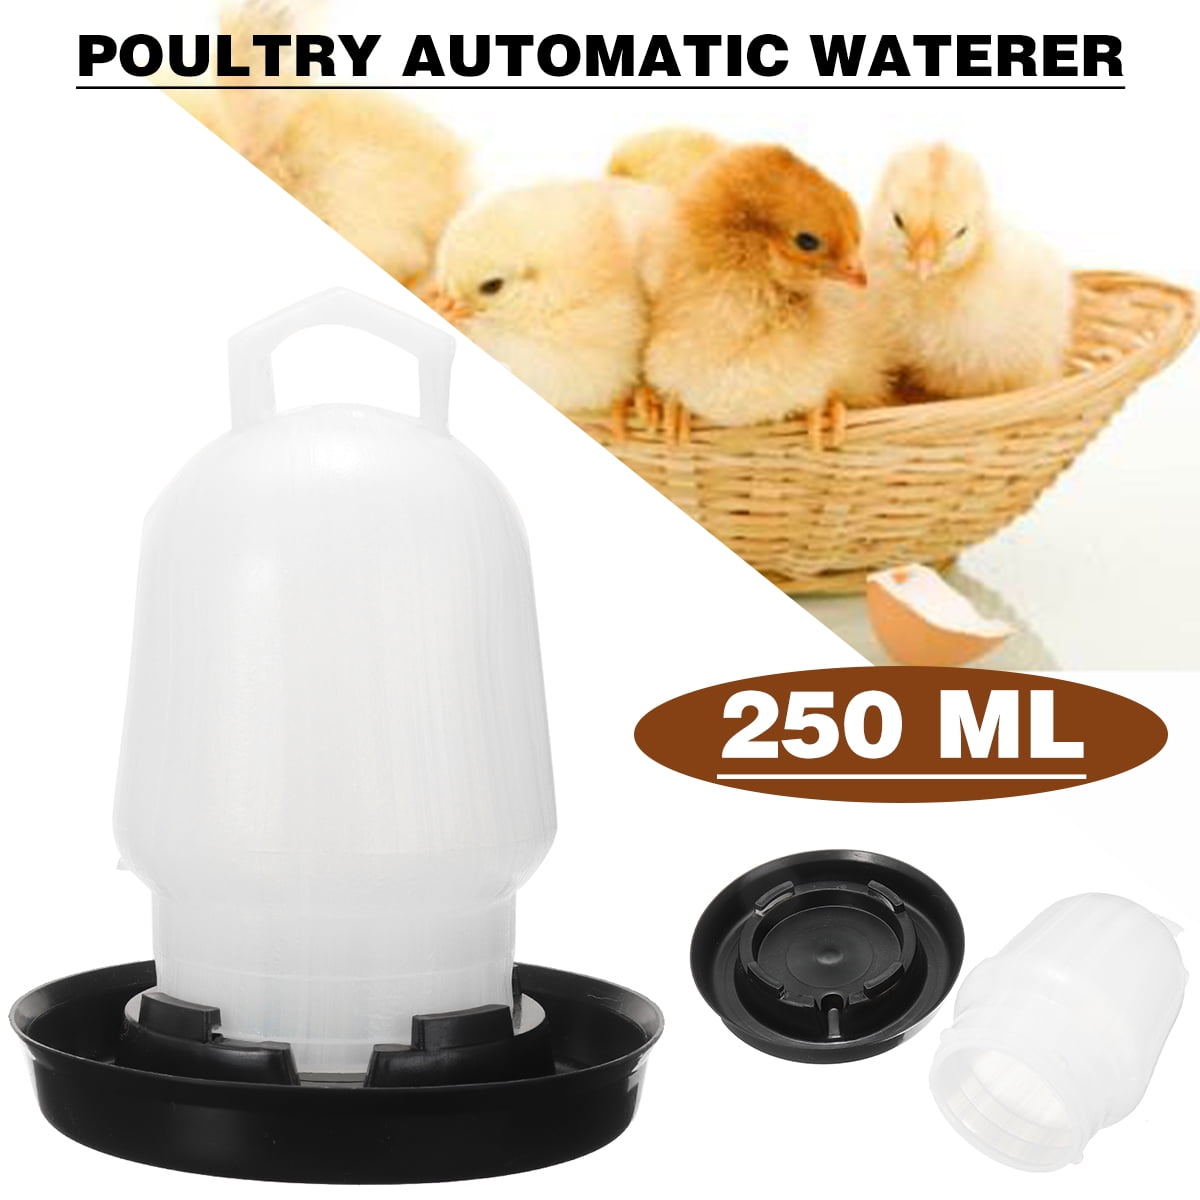 Automatic Pet Feeder Chicken Quail Poultry Bird Pheasant Feed Water Tool 30 G*HW 